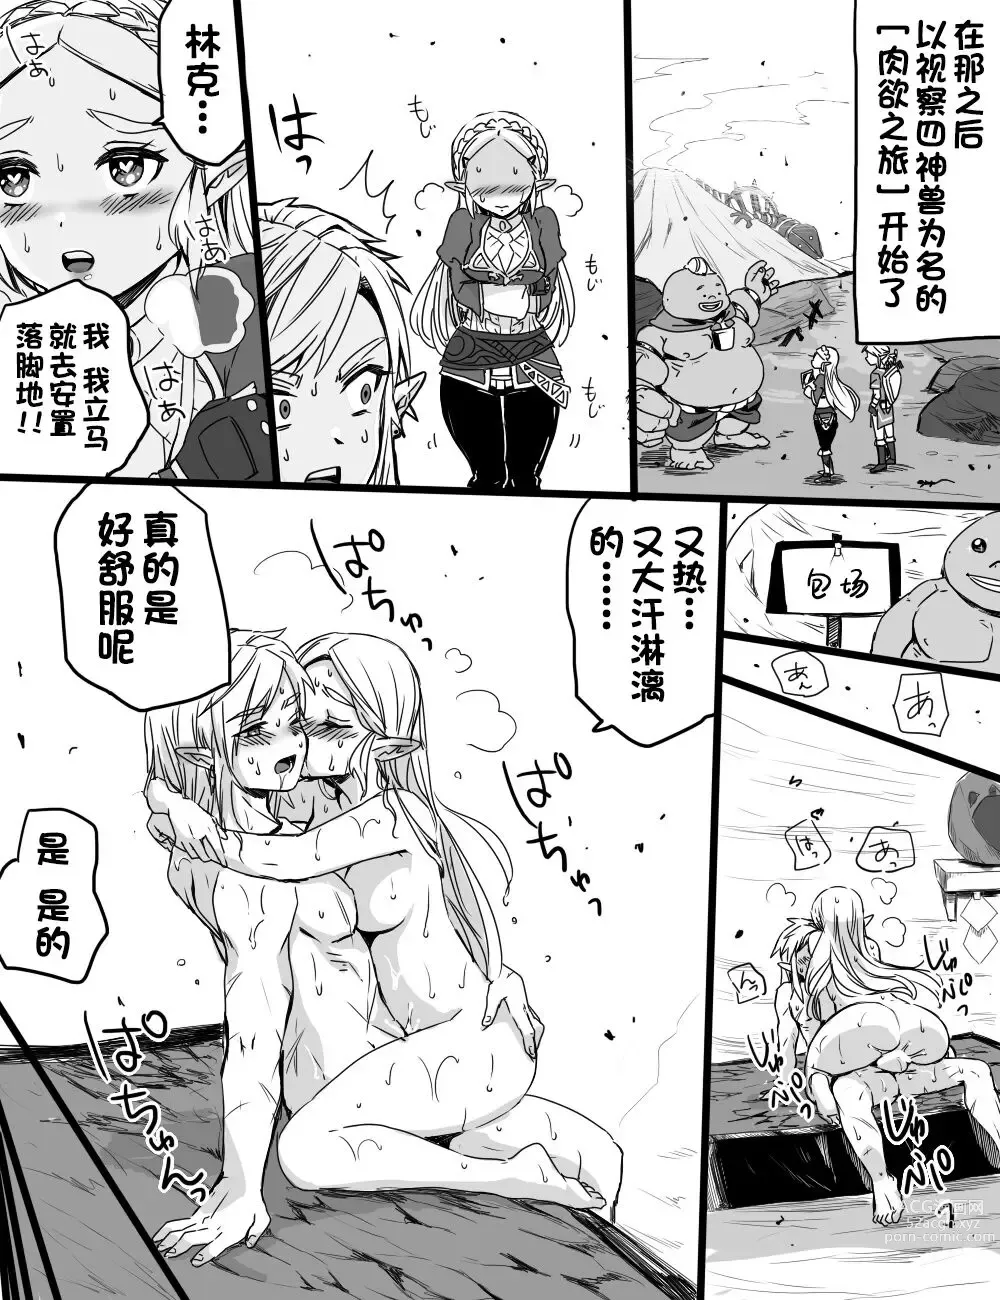 Page 6 of doujinshi Love Pond Power 2